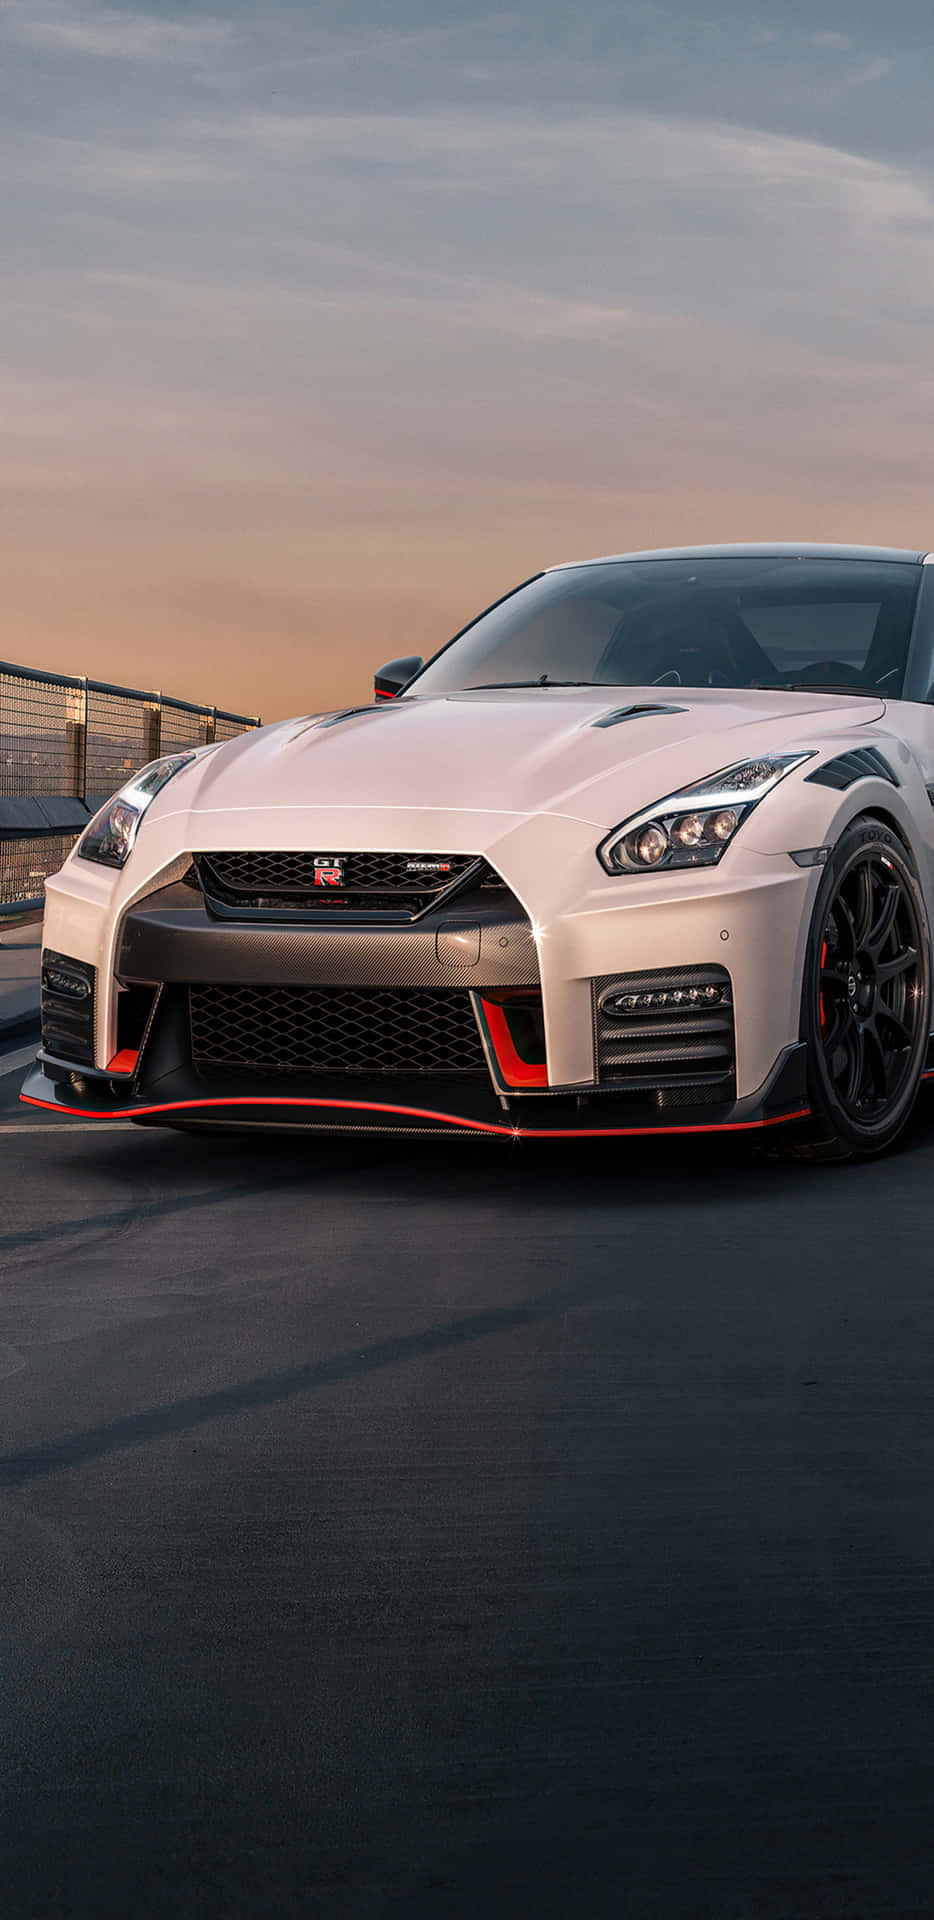 Nissangtr - R-spec - R Would Be Translated Into Swedish As 